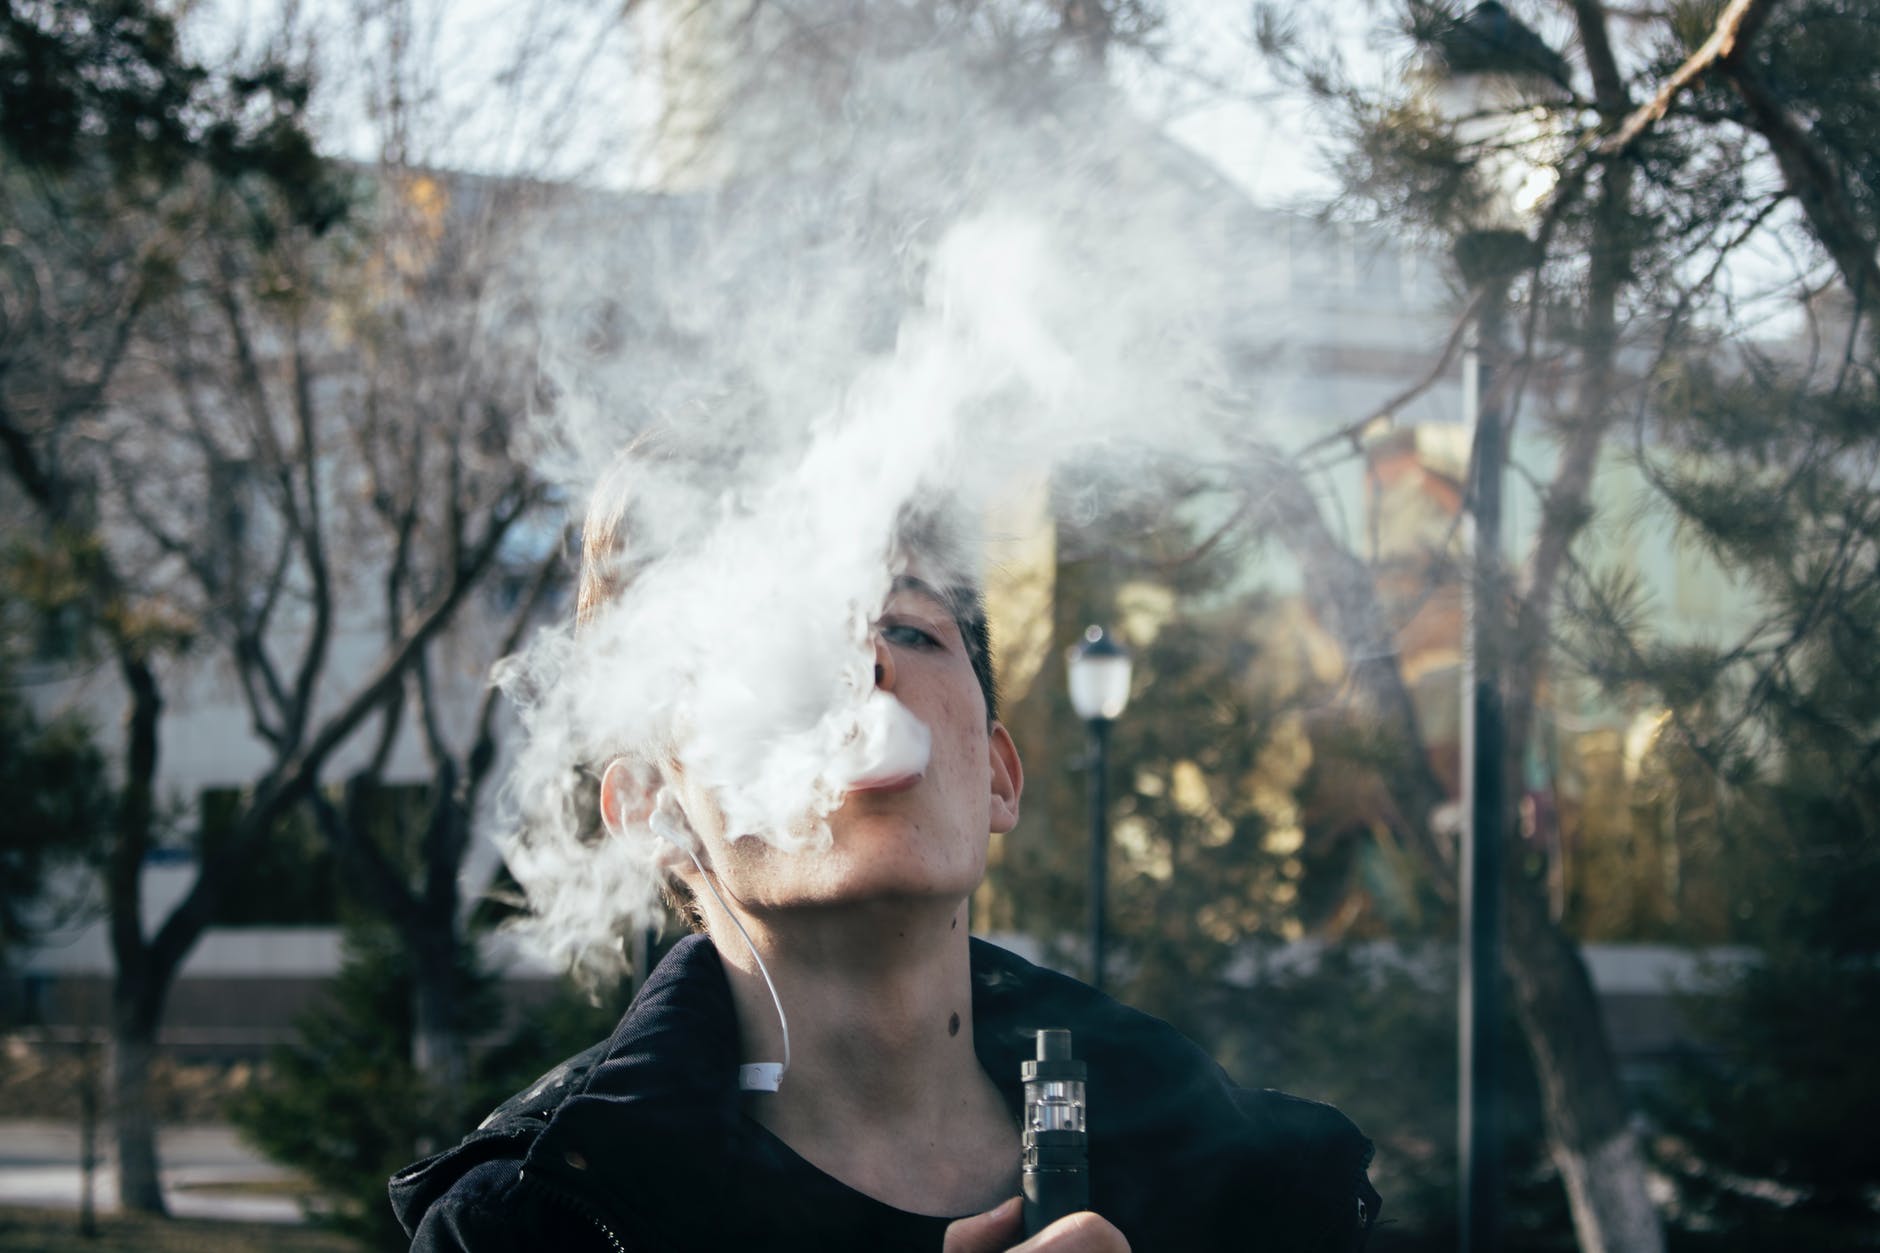 Article about Outdoor Vaping: 4 Interesting Facts You Need To Know